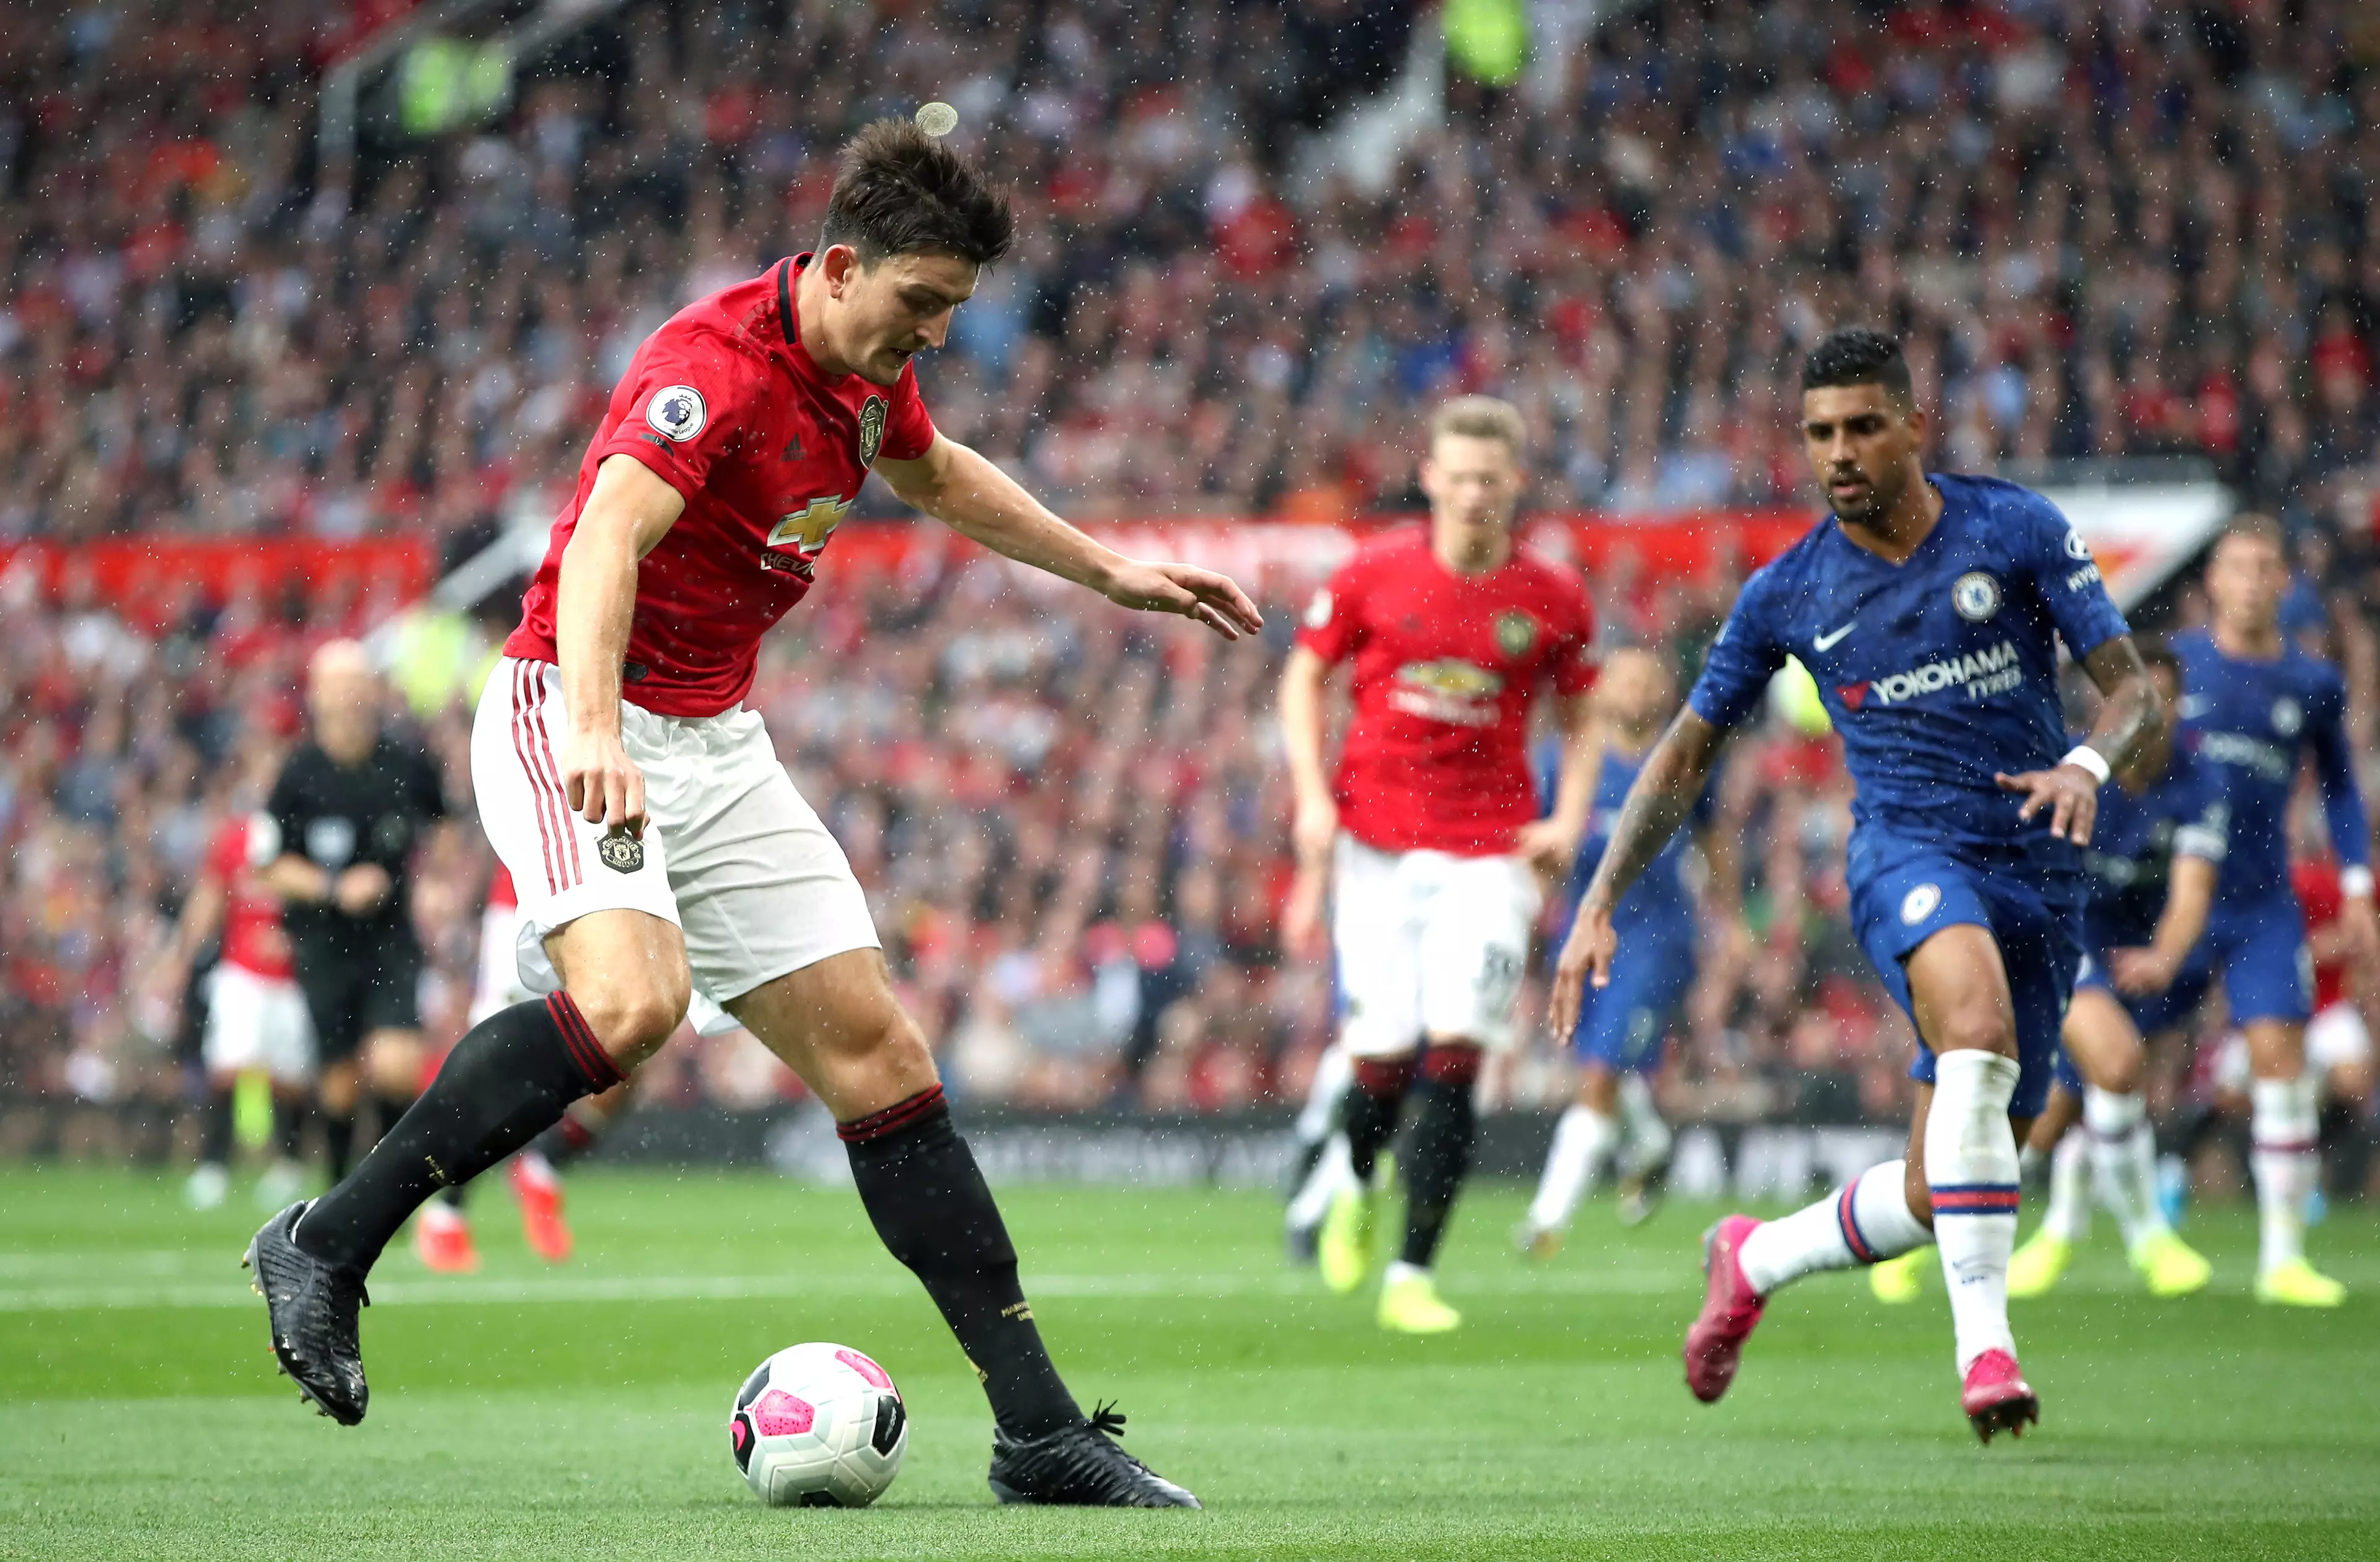 Harry Maguire was named man of the match on his Manchester United debut against Chelsea